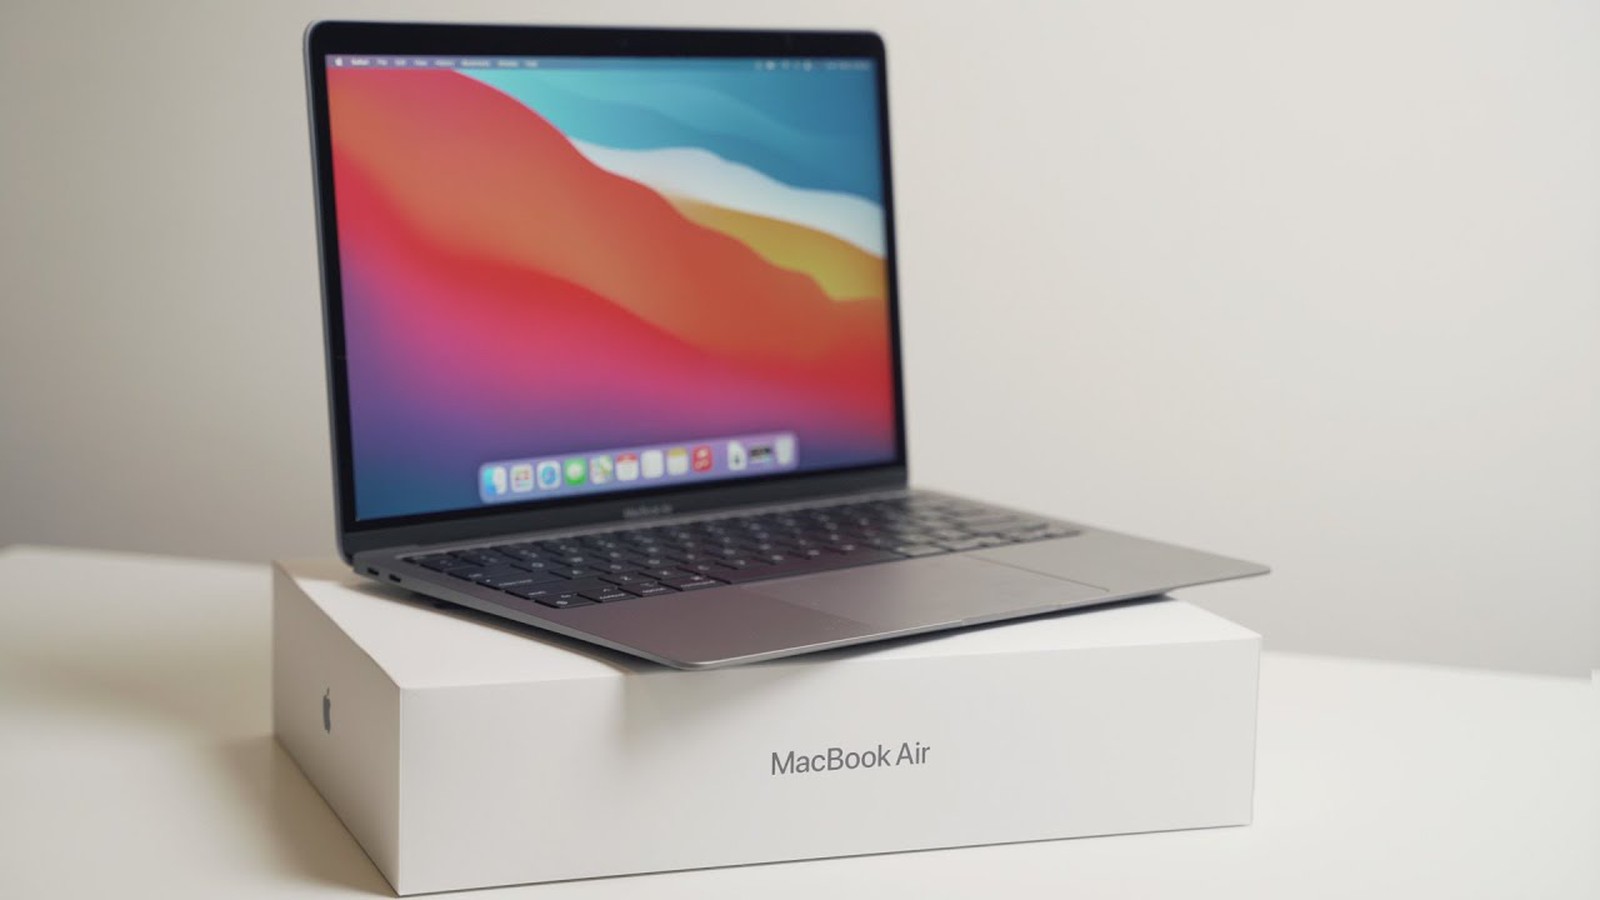 MacBook Air Just Updated! Apple M1 Chip & 18Hour Battery